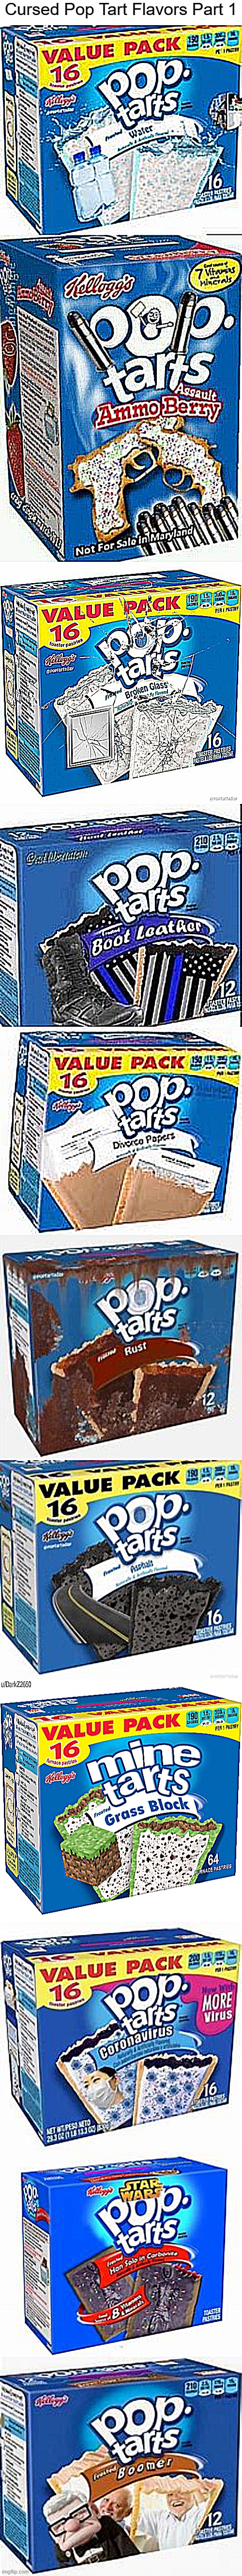 Part 2 coming soon! | Cursed Pop Tart Flavors Part 1 | image tagged in poptart,memes | made w/ Imgflip meme maker